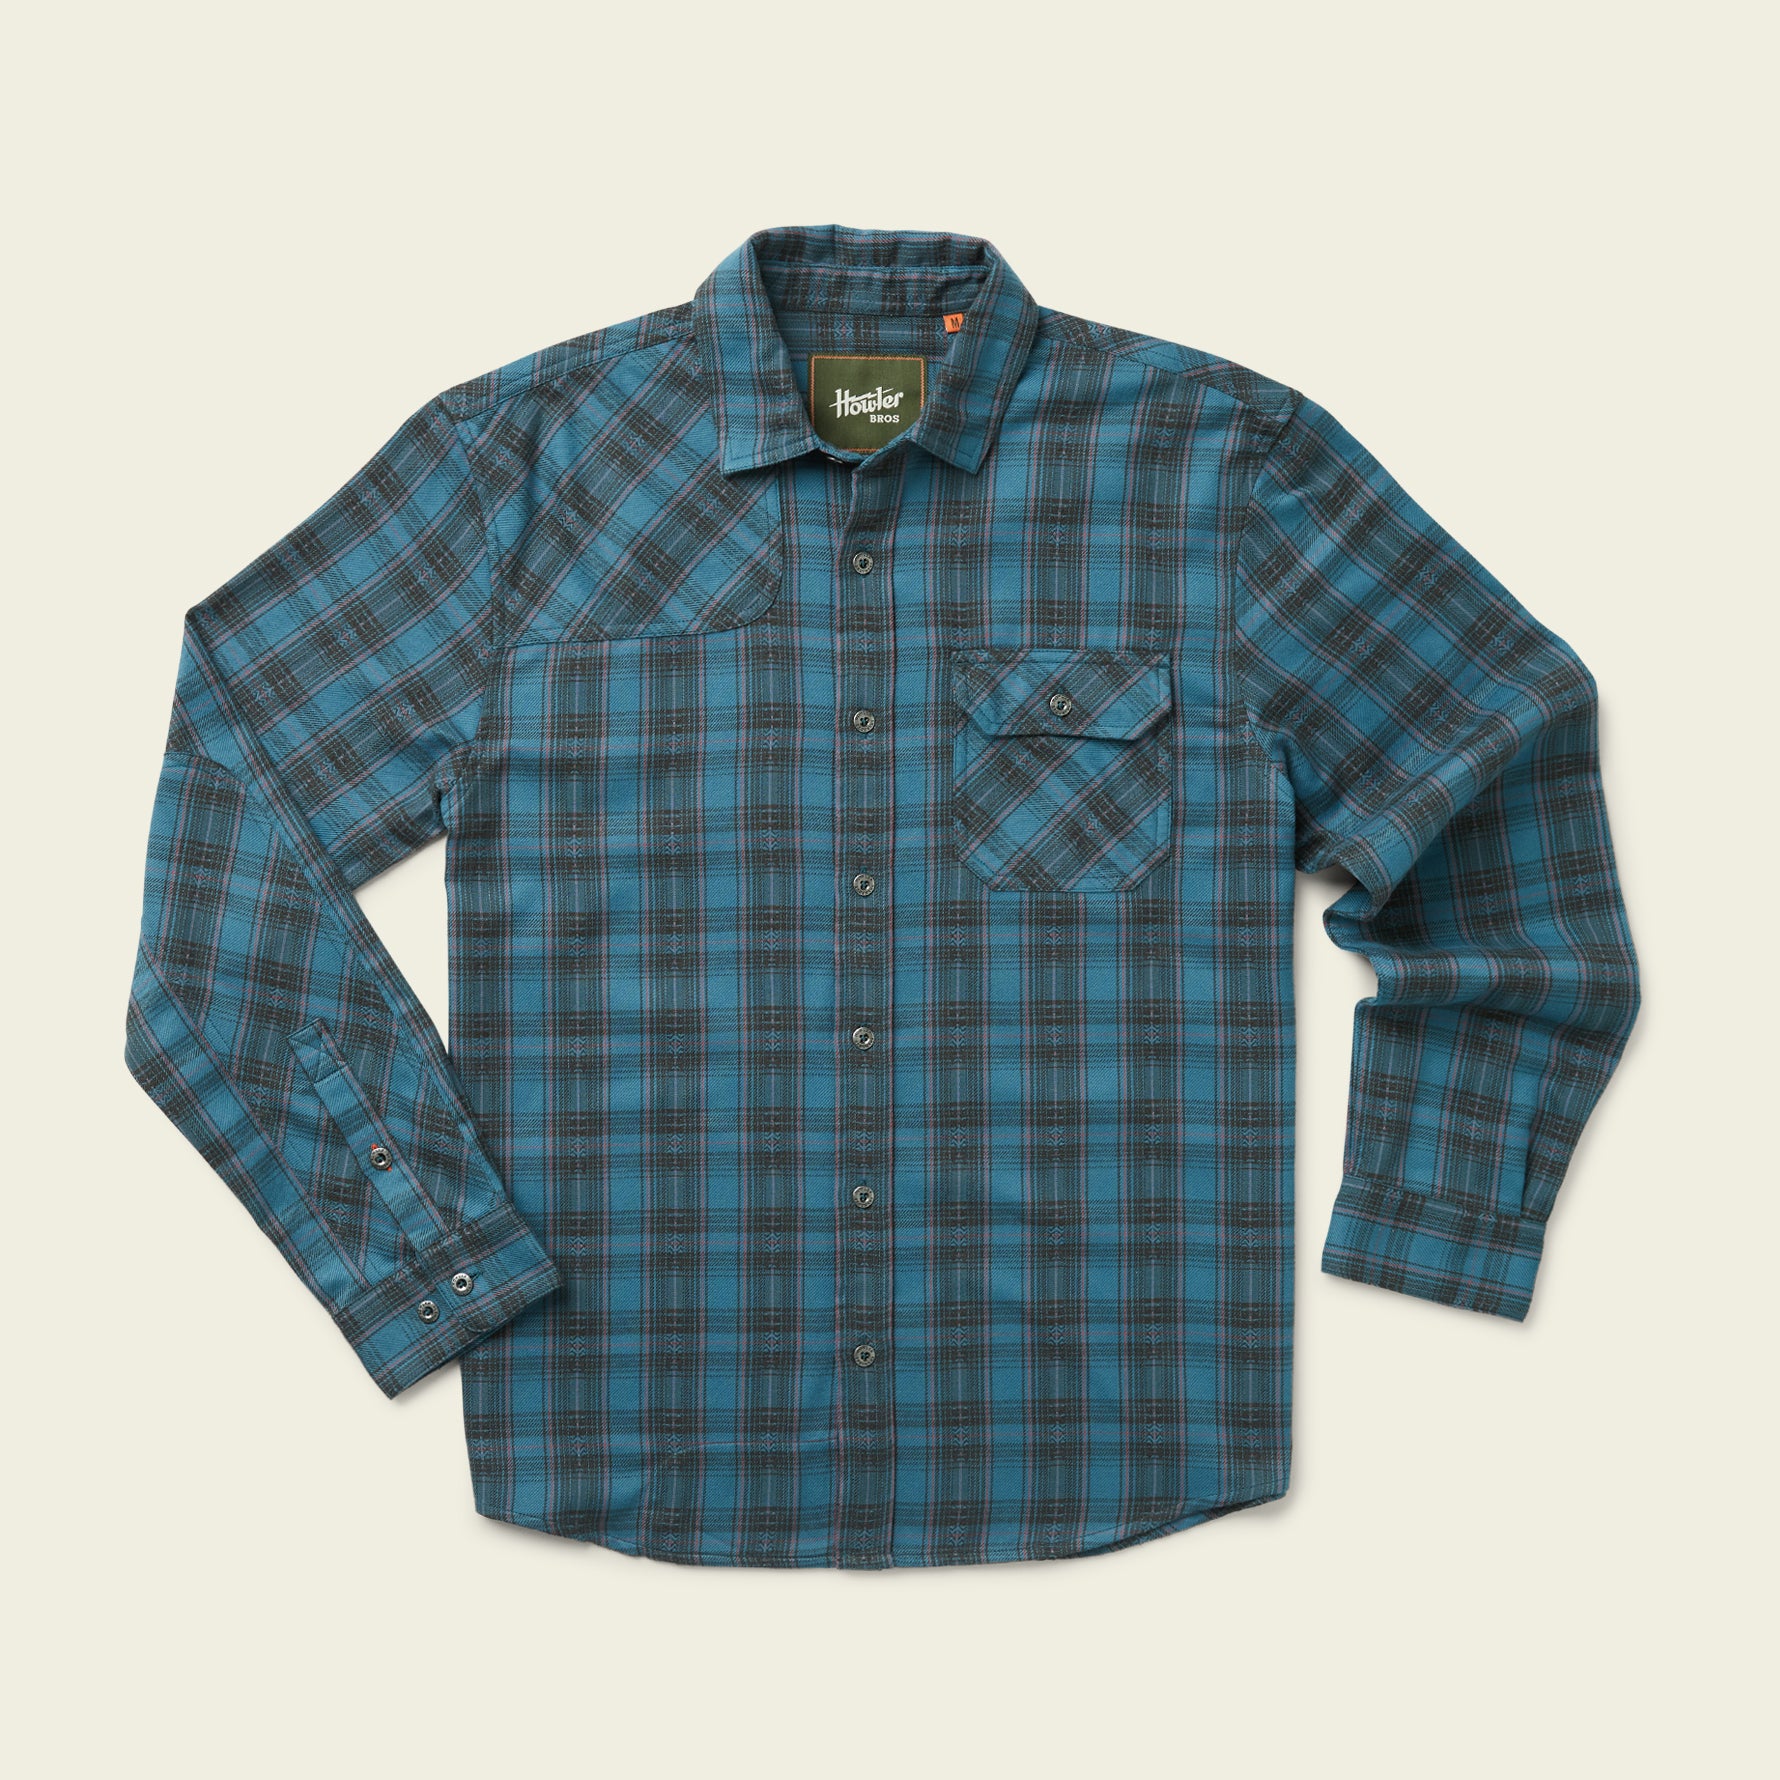 Harker's Flannel – HOWLER BROTHERS